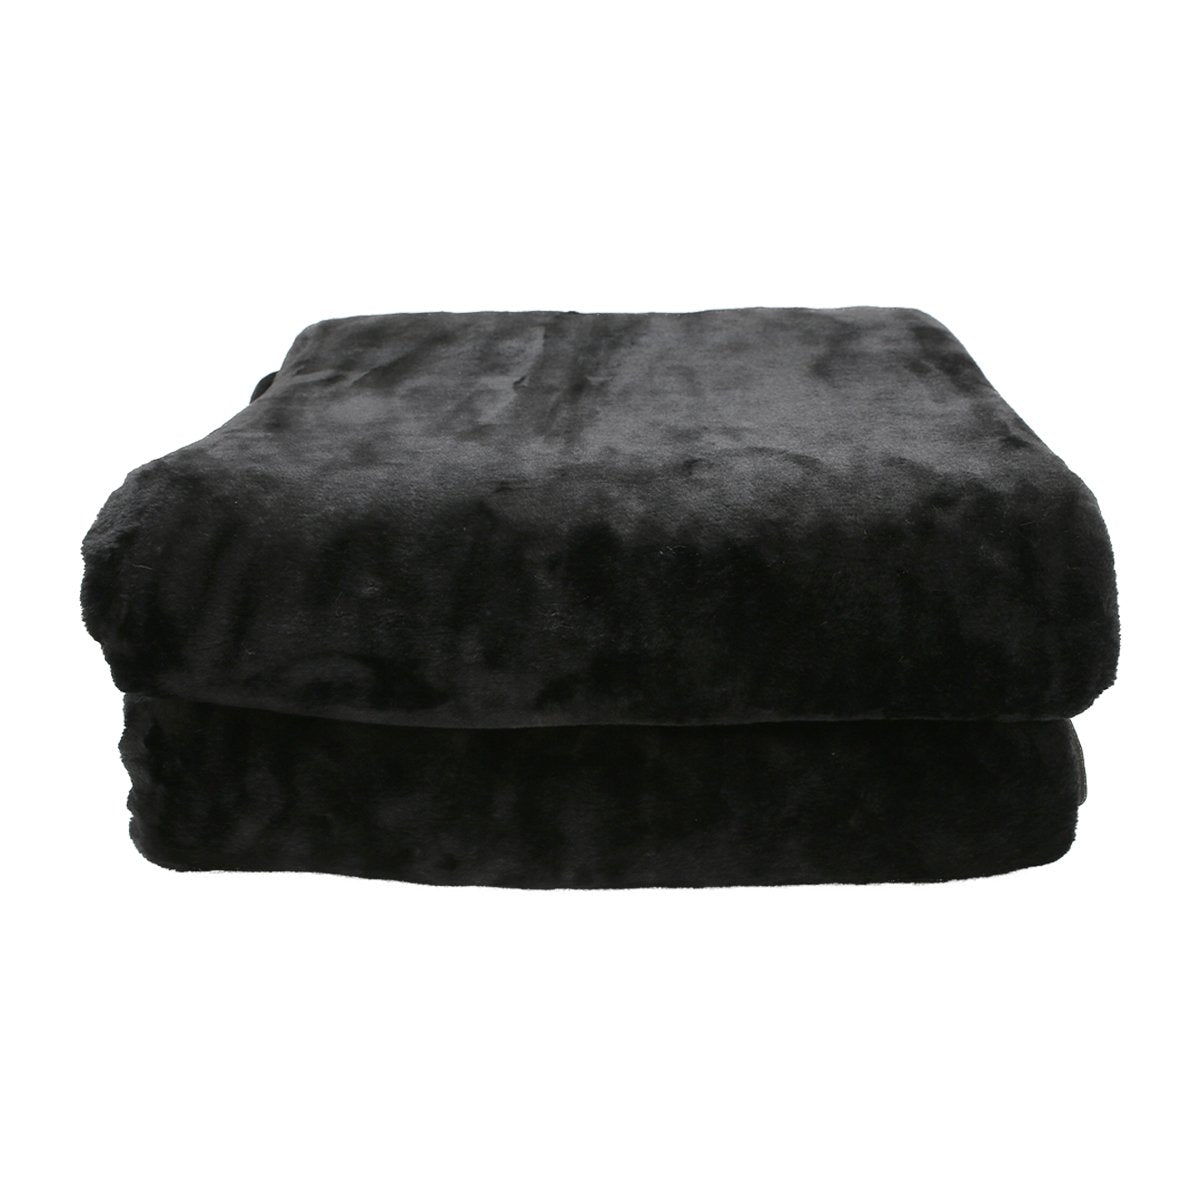 800-gsm Faux Mink Throw Rug Blanket Queen Size Double-sided Large Super Luxurious Soft Heavy - Black